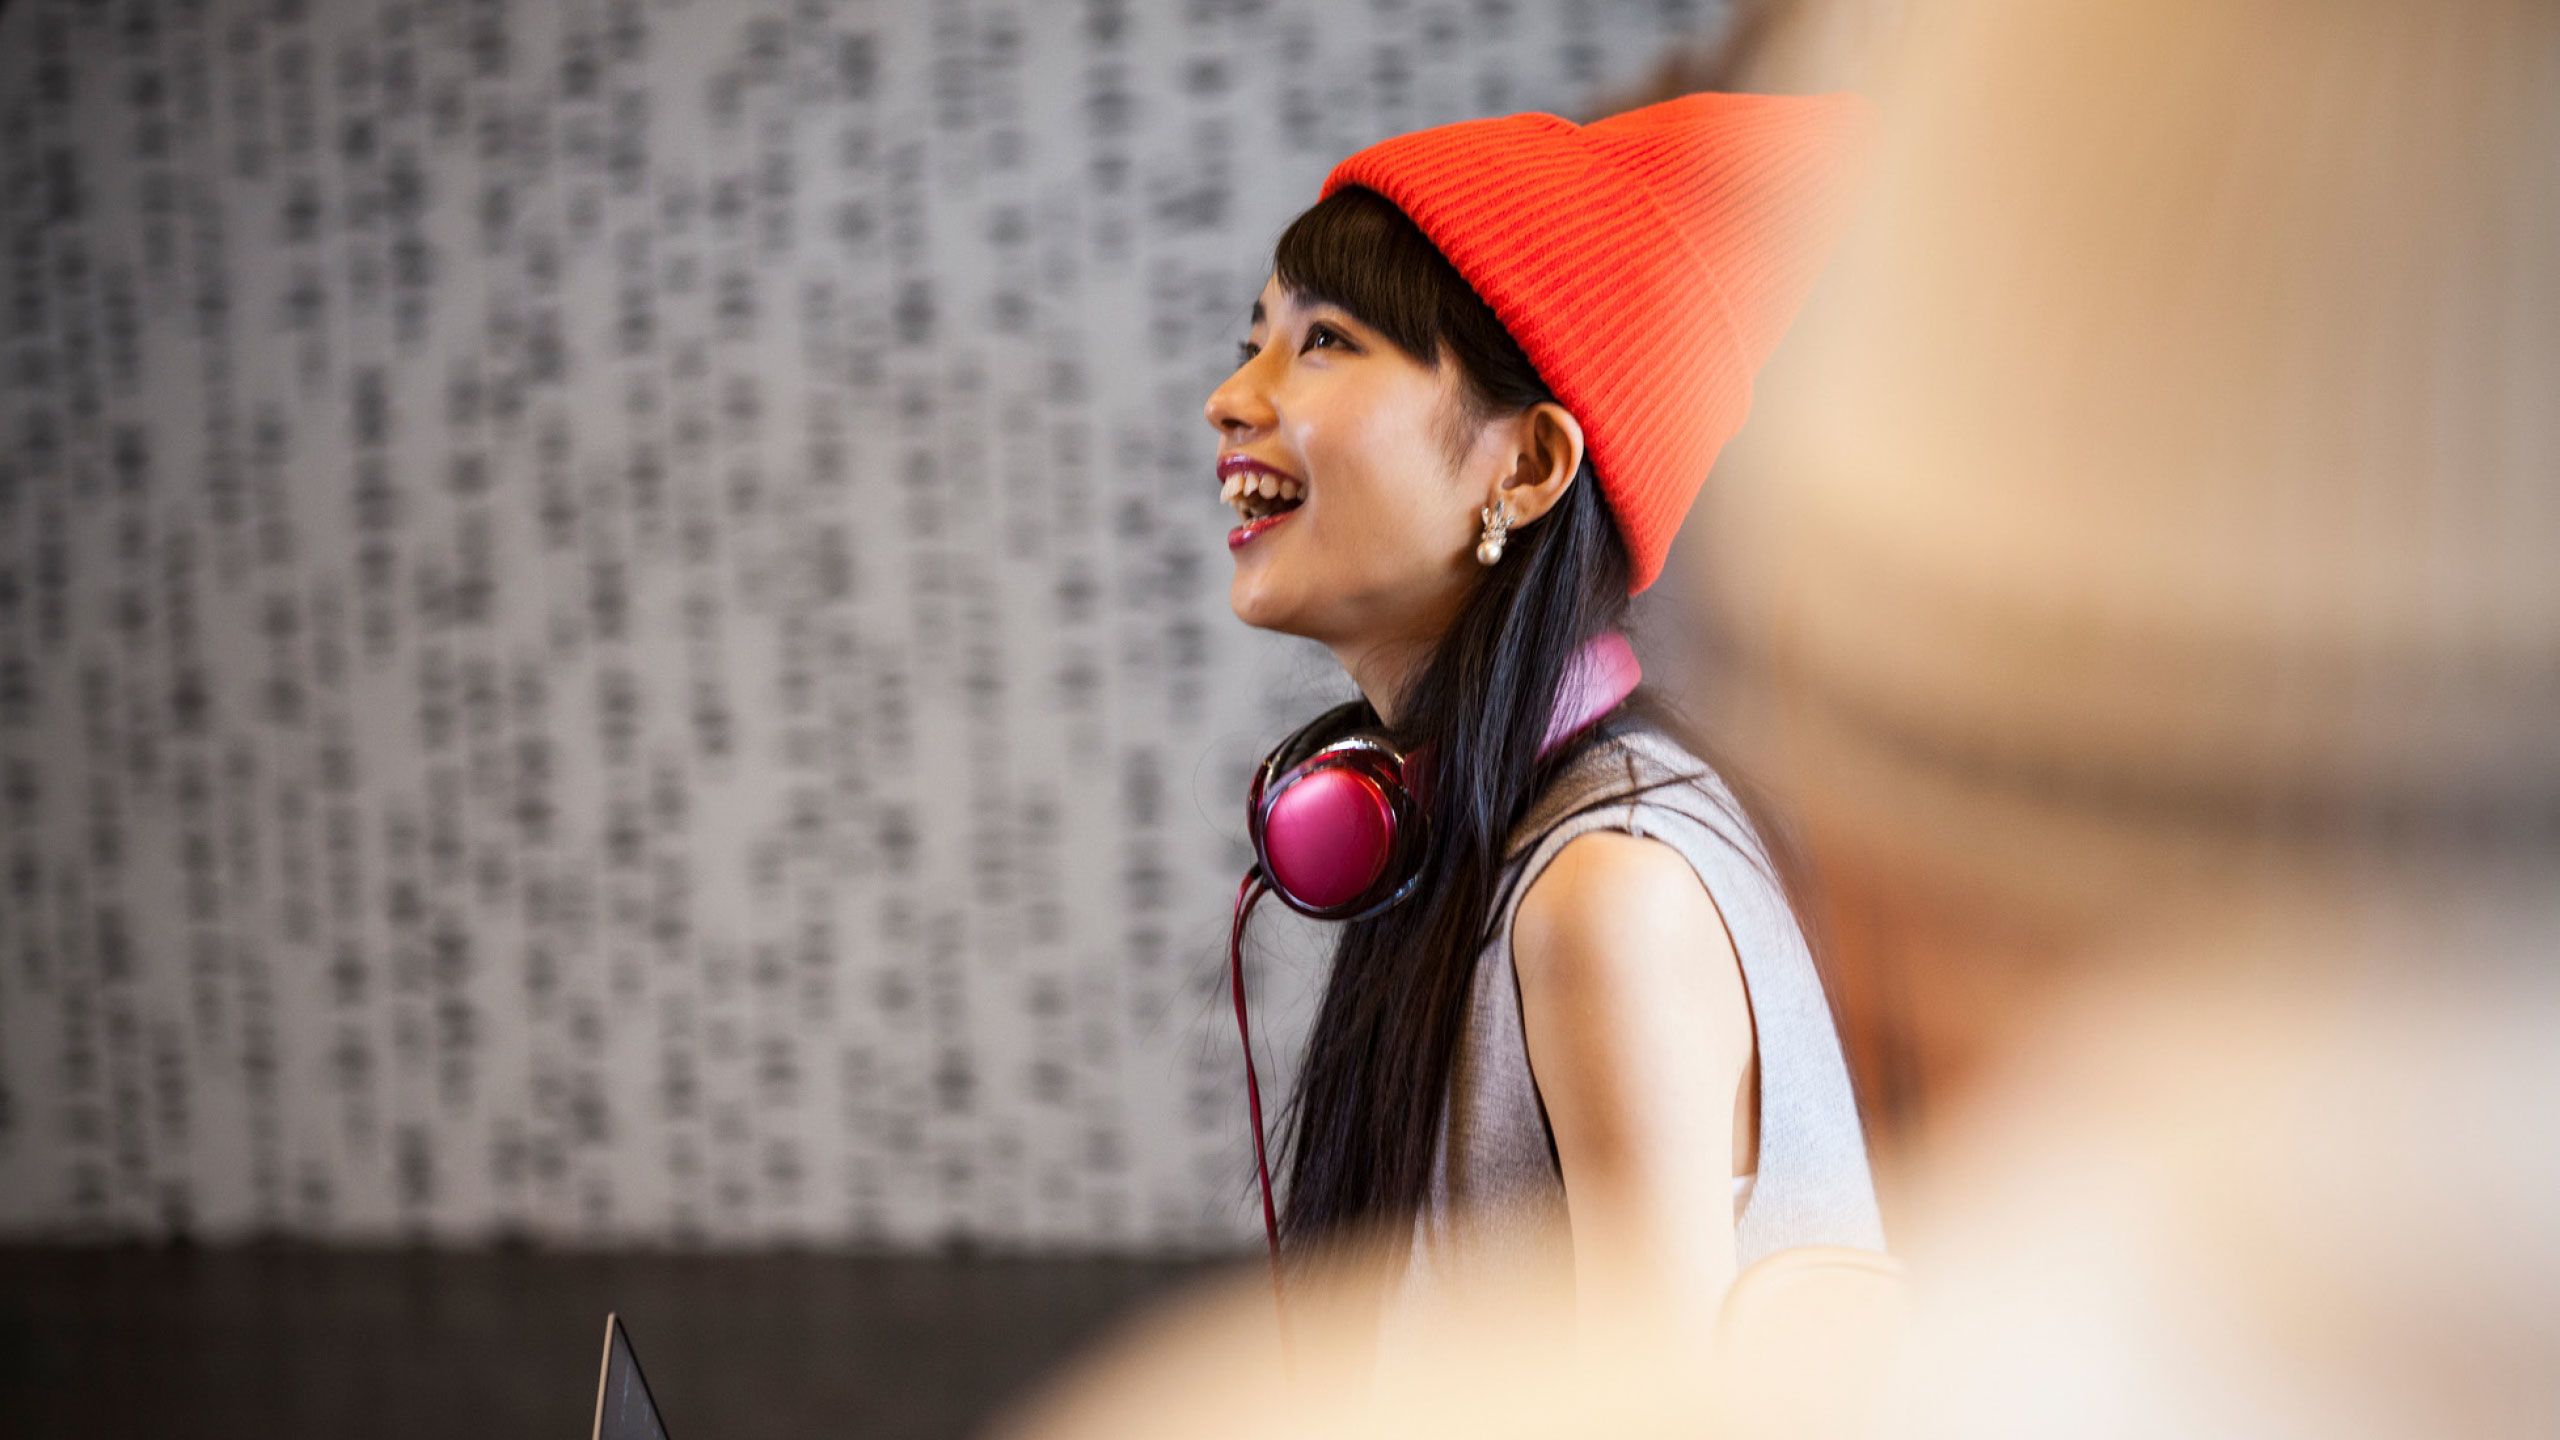 YOUNG WOMAN wearing orange hat and pink headphones around her neck